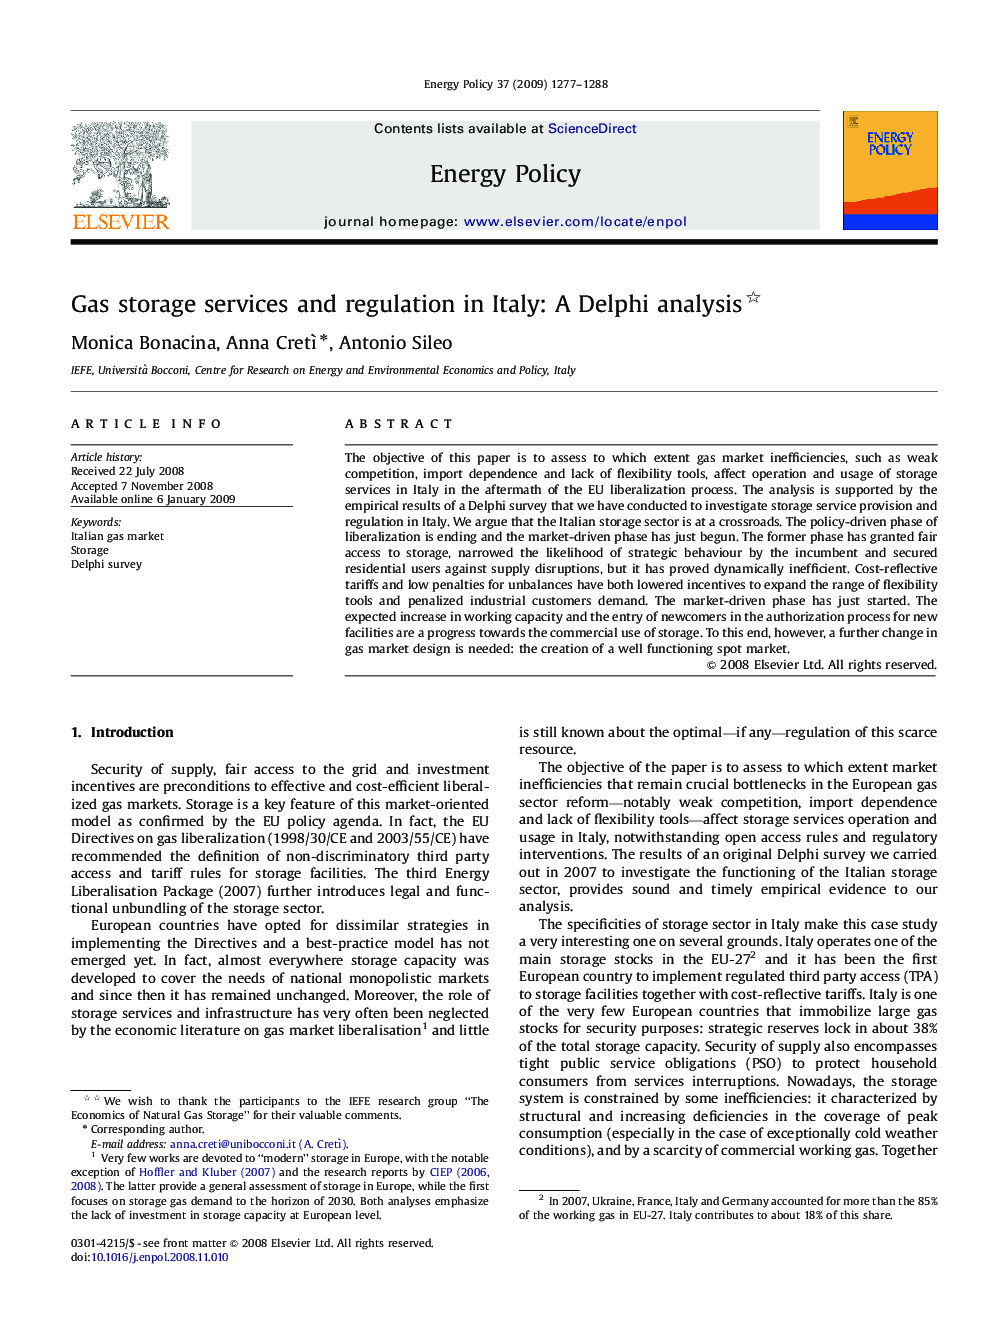 Gas storage services and regulation in Italy: A Delphi analysis 